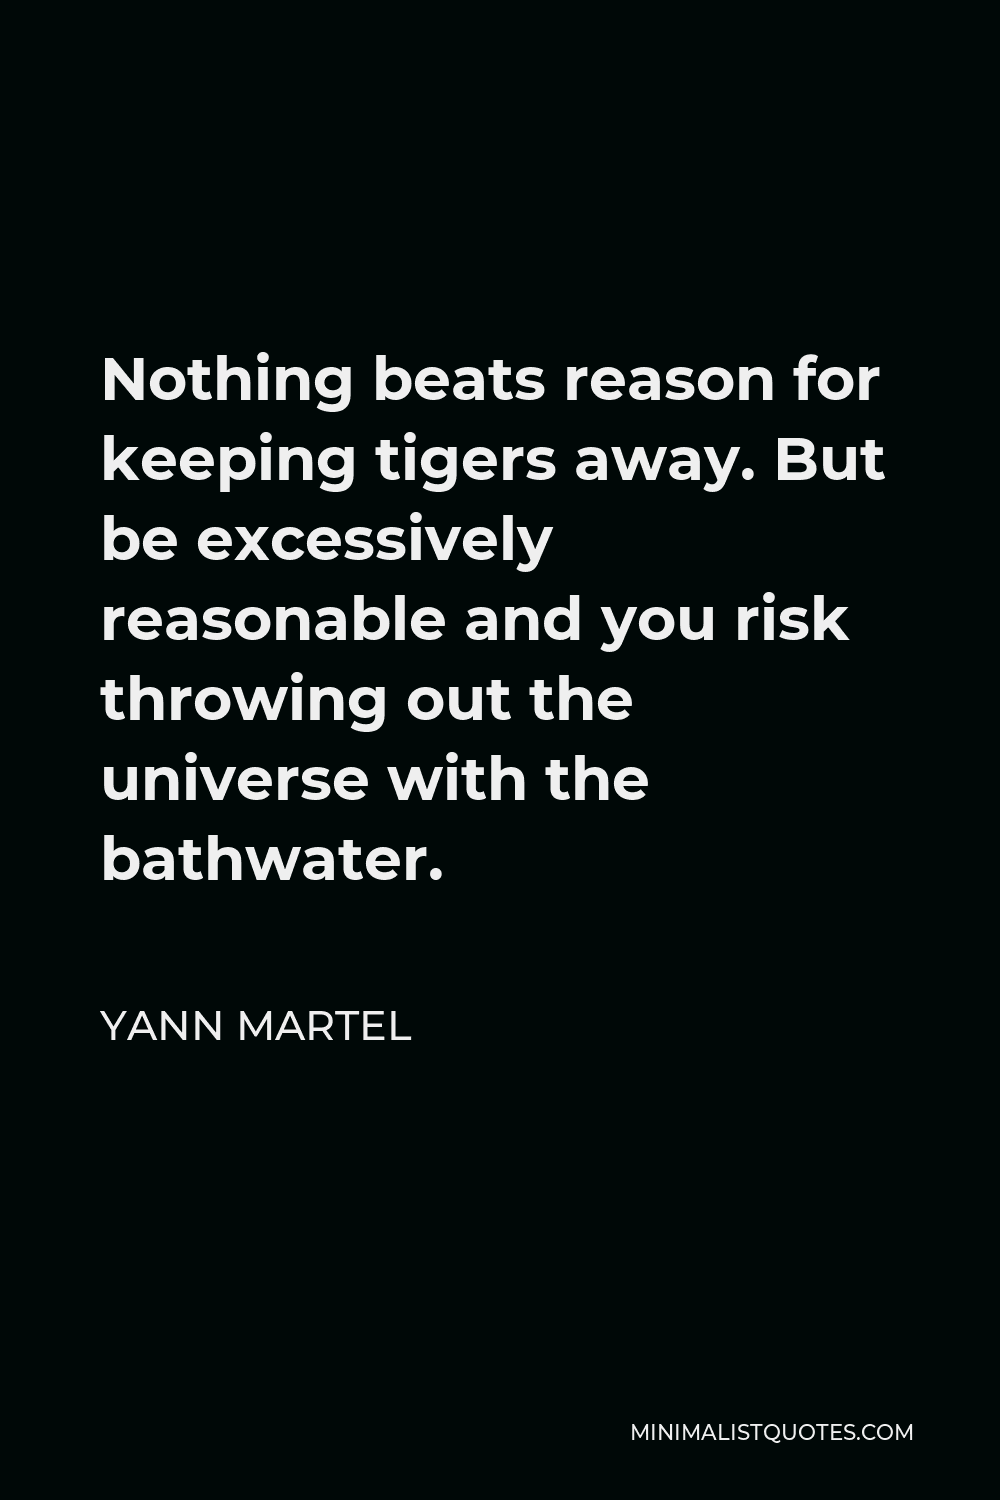 Yann Martel Quote - Nothing beats reason for keeping tigers away. But be excessively reasonable and you risk throwing out the universe with the bathwater.